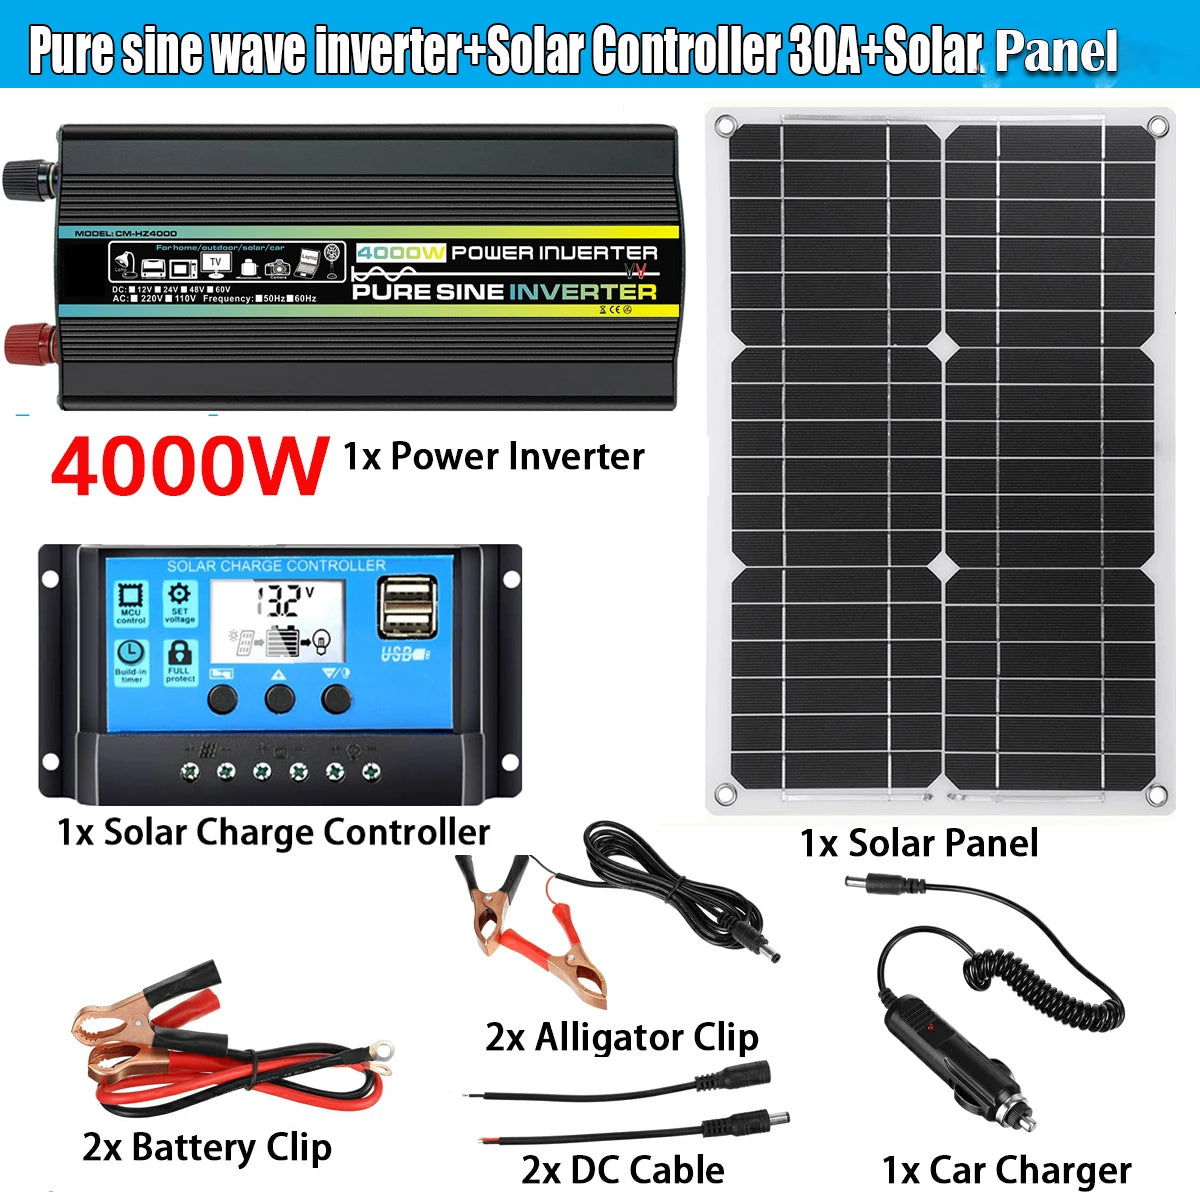 3000W/4000W/6000W Pure Sine Wave Inverter, Off-grid solar power kit for charging batteries and devices on-the-go.